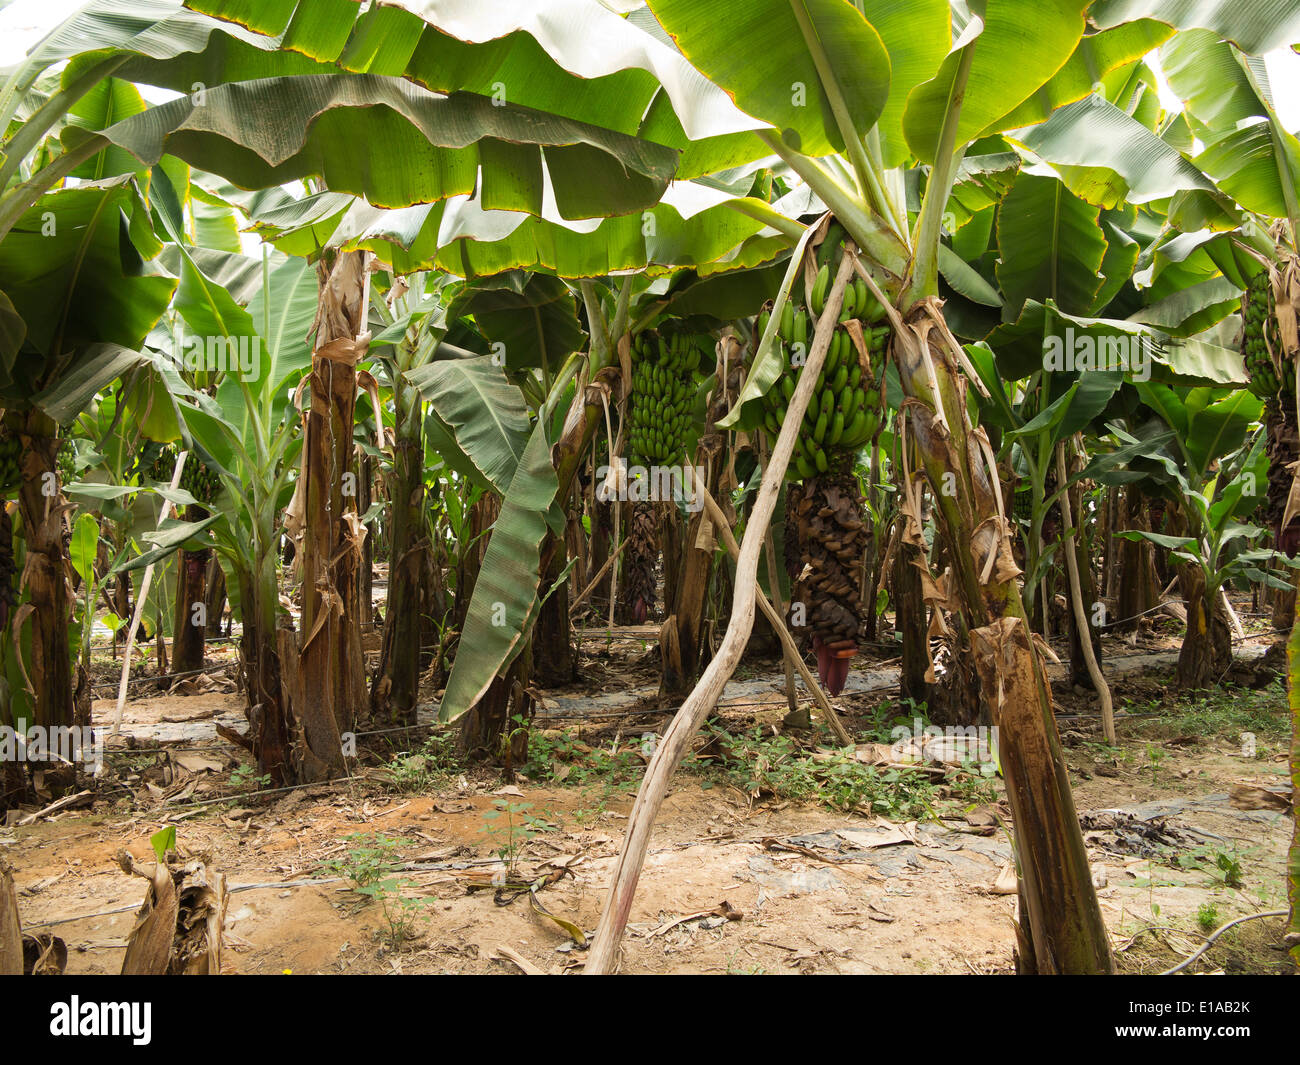 Details of banana trees showing unripe green fruit and inflorescence ...